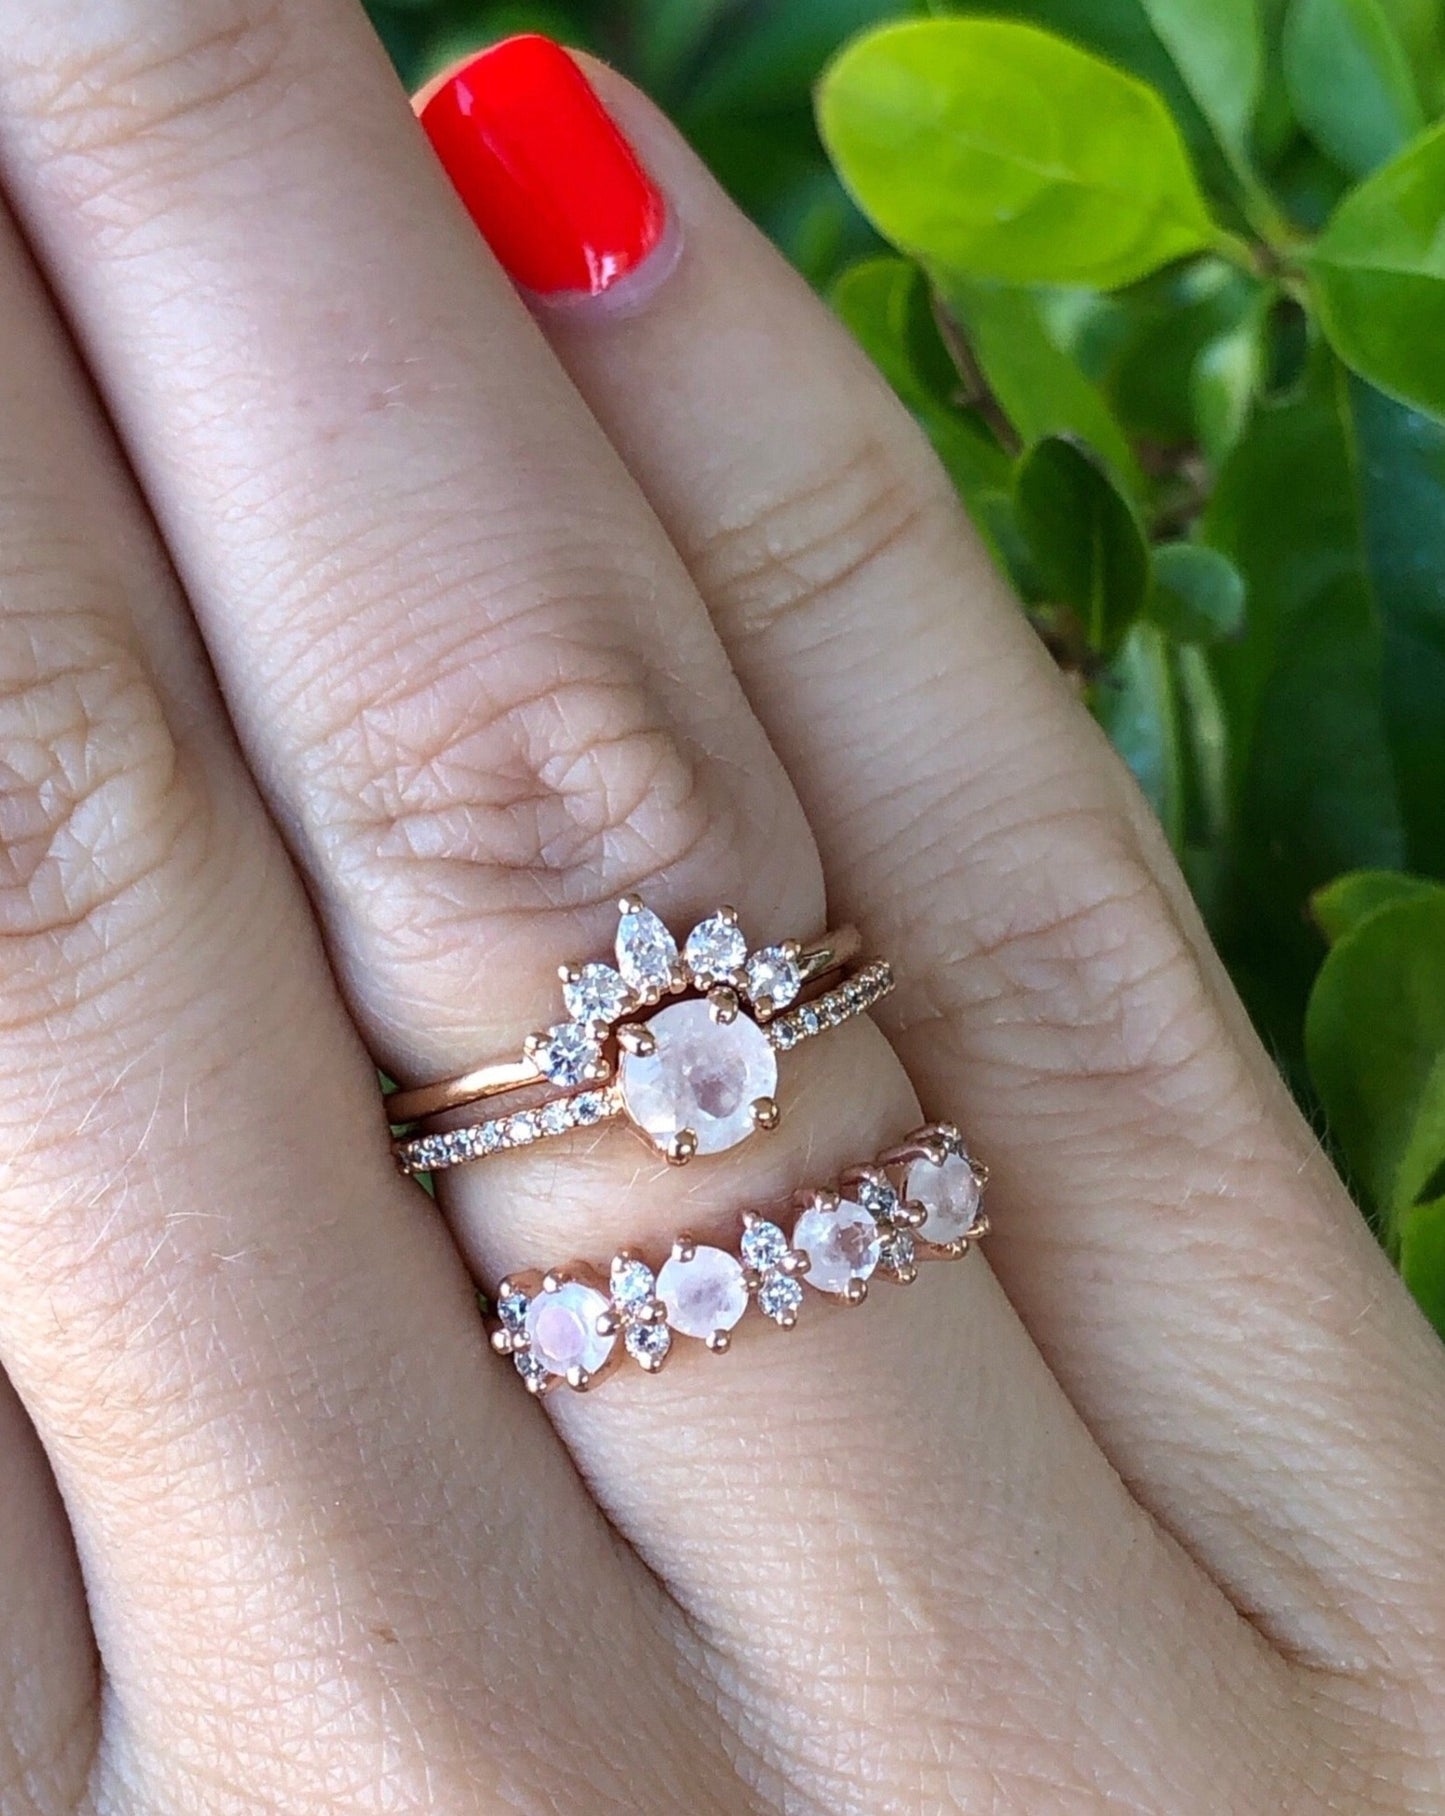 Rose gold and gemstone stacking rings on hand